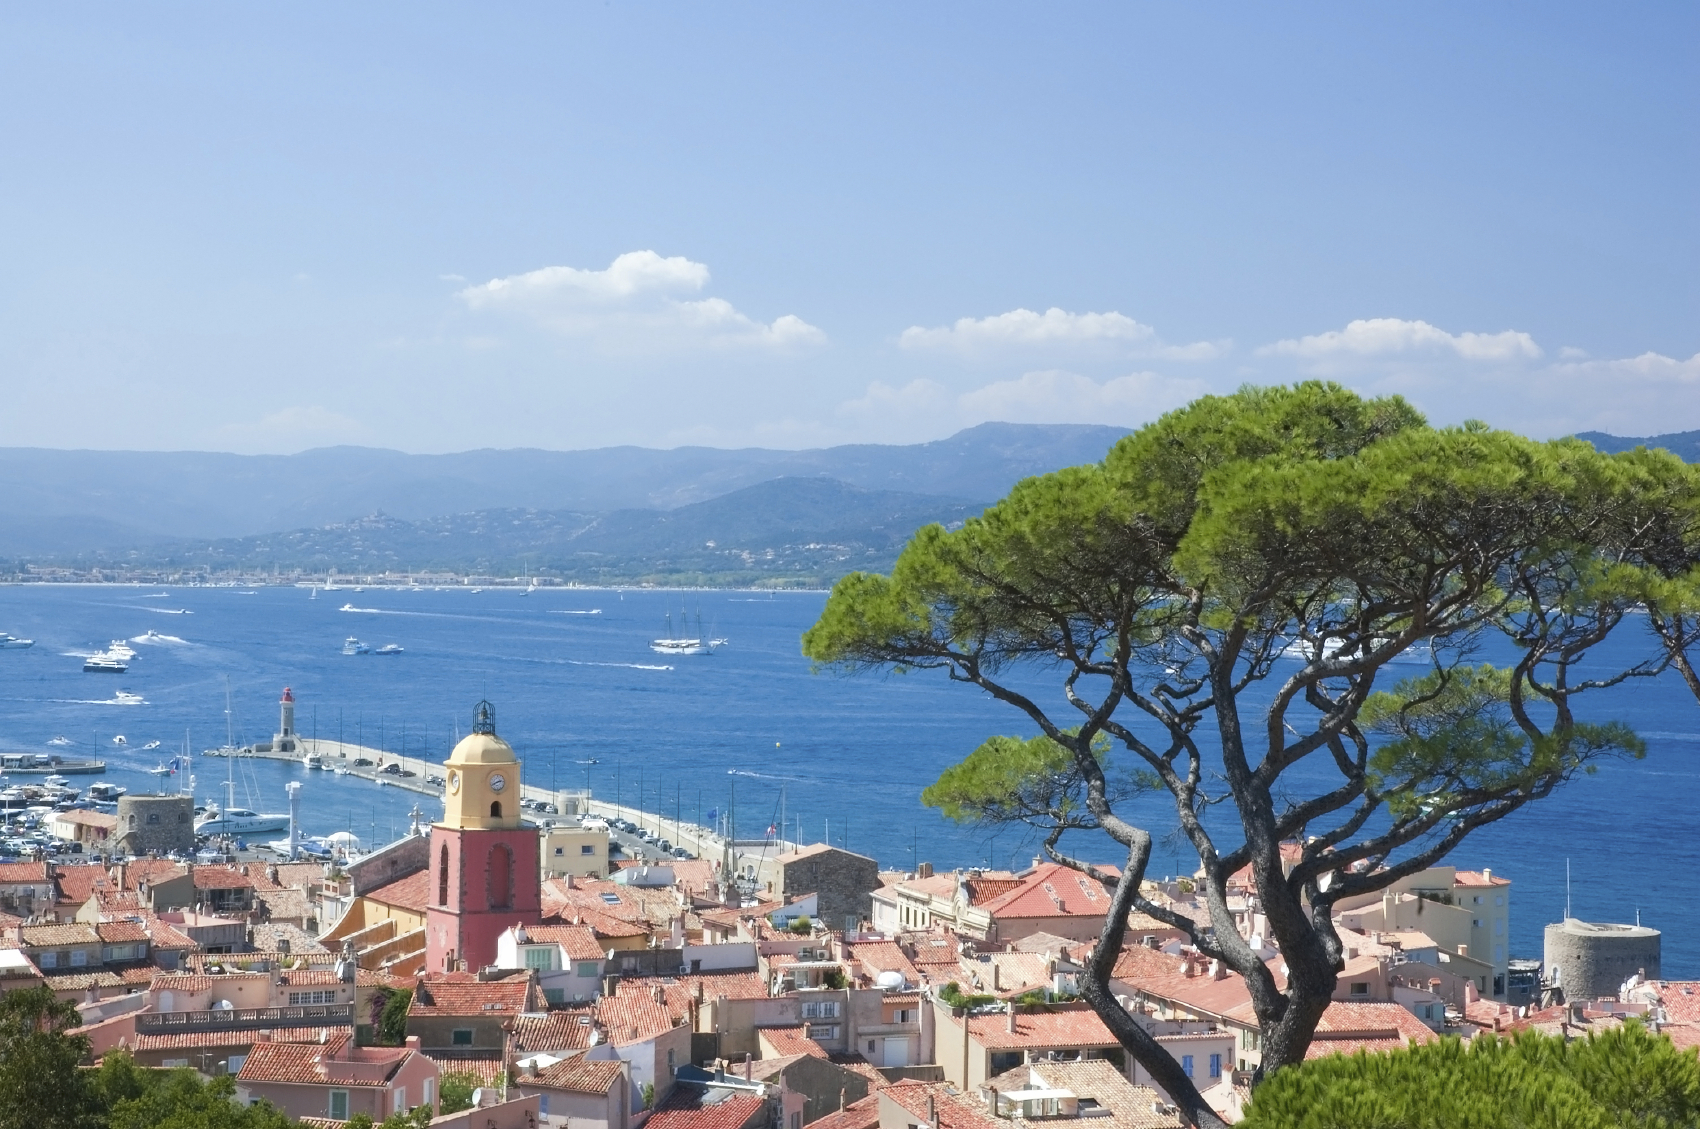 Saint Tropez property market recovering and boosted by strong sterling